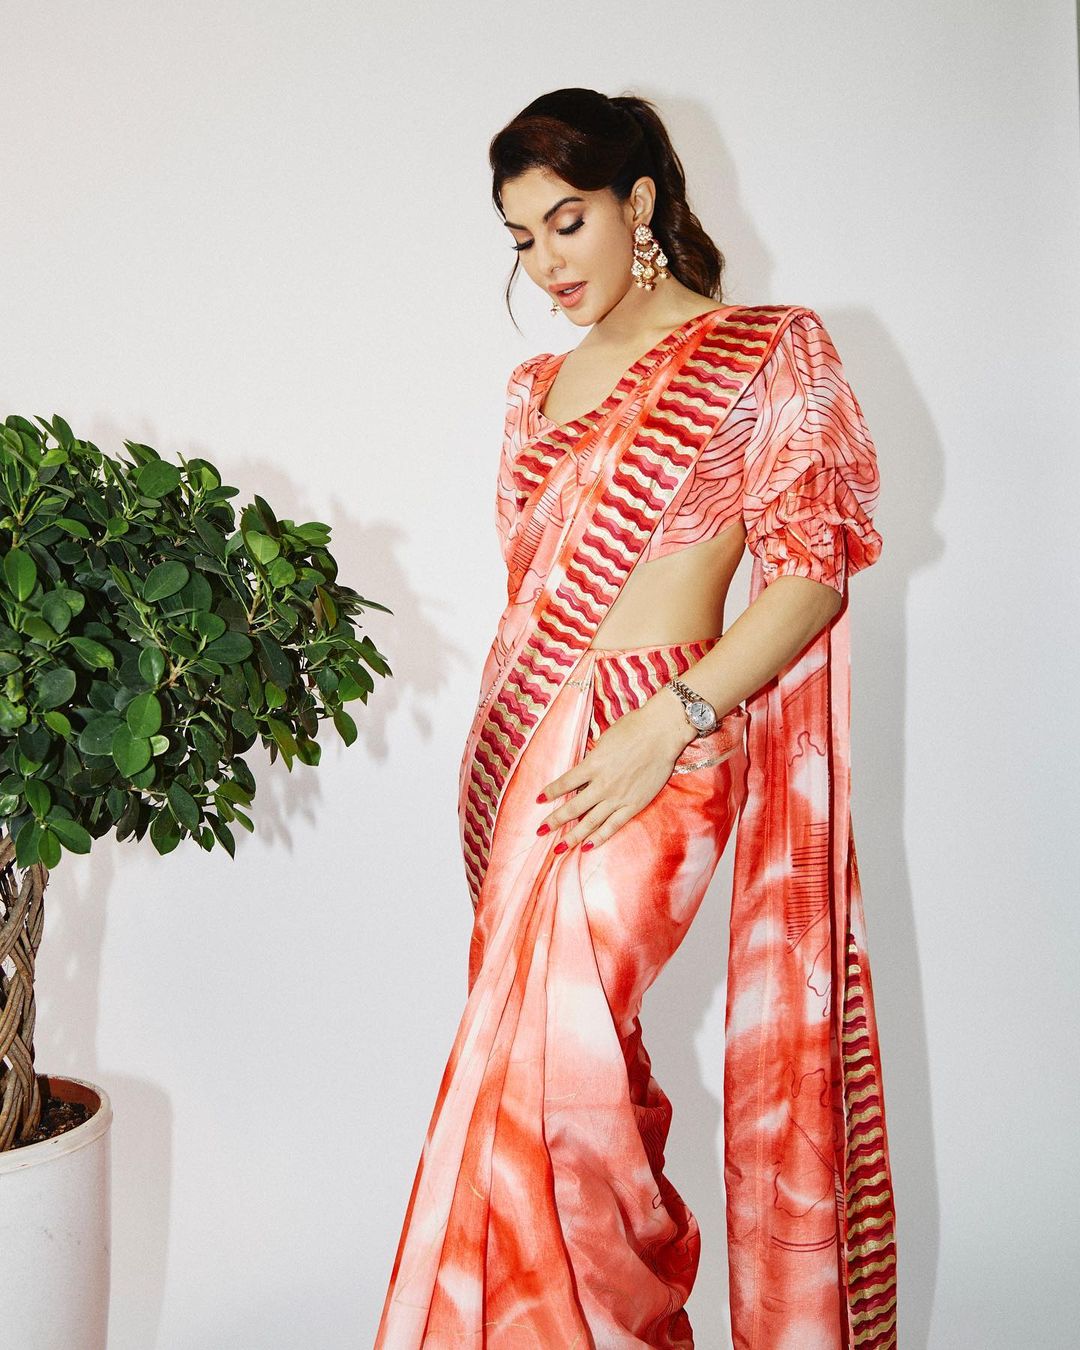 Jacqueline Fernandez looks stunning in the red printed saree